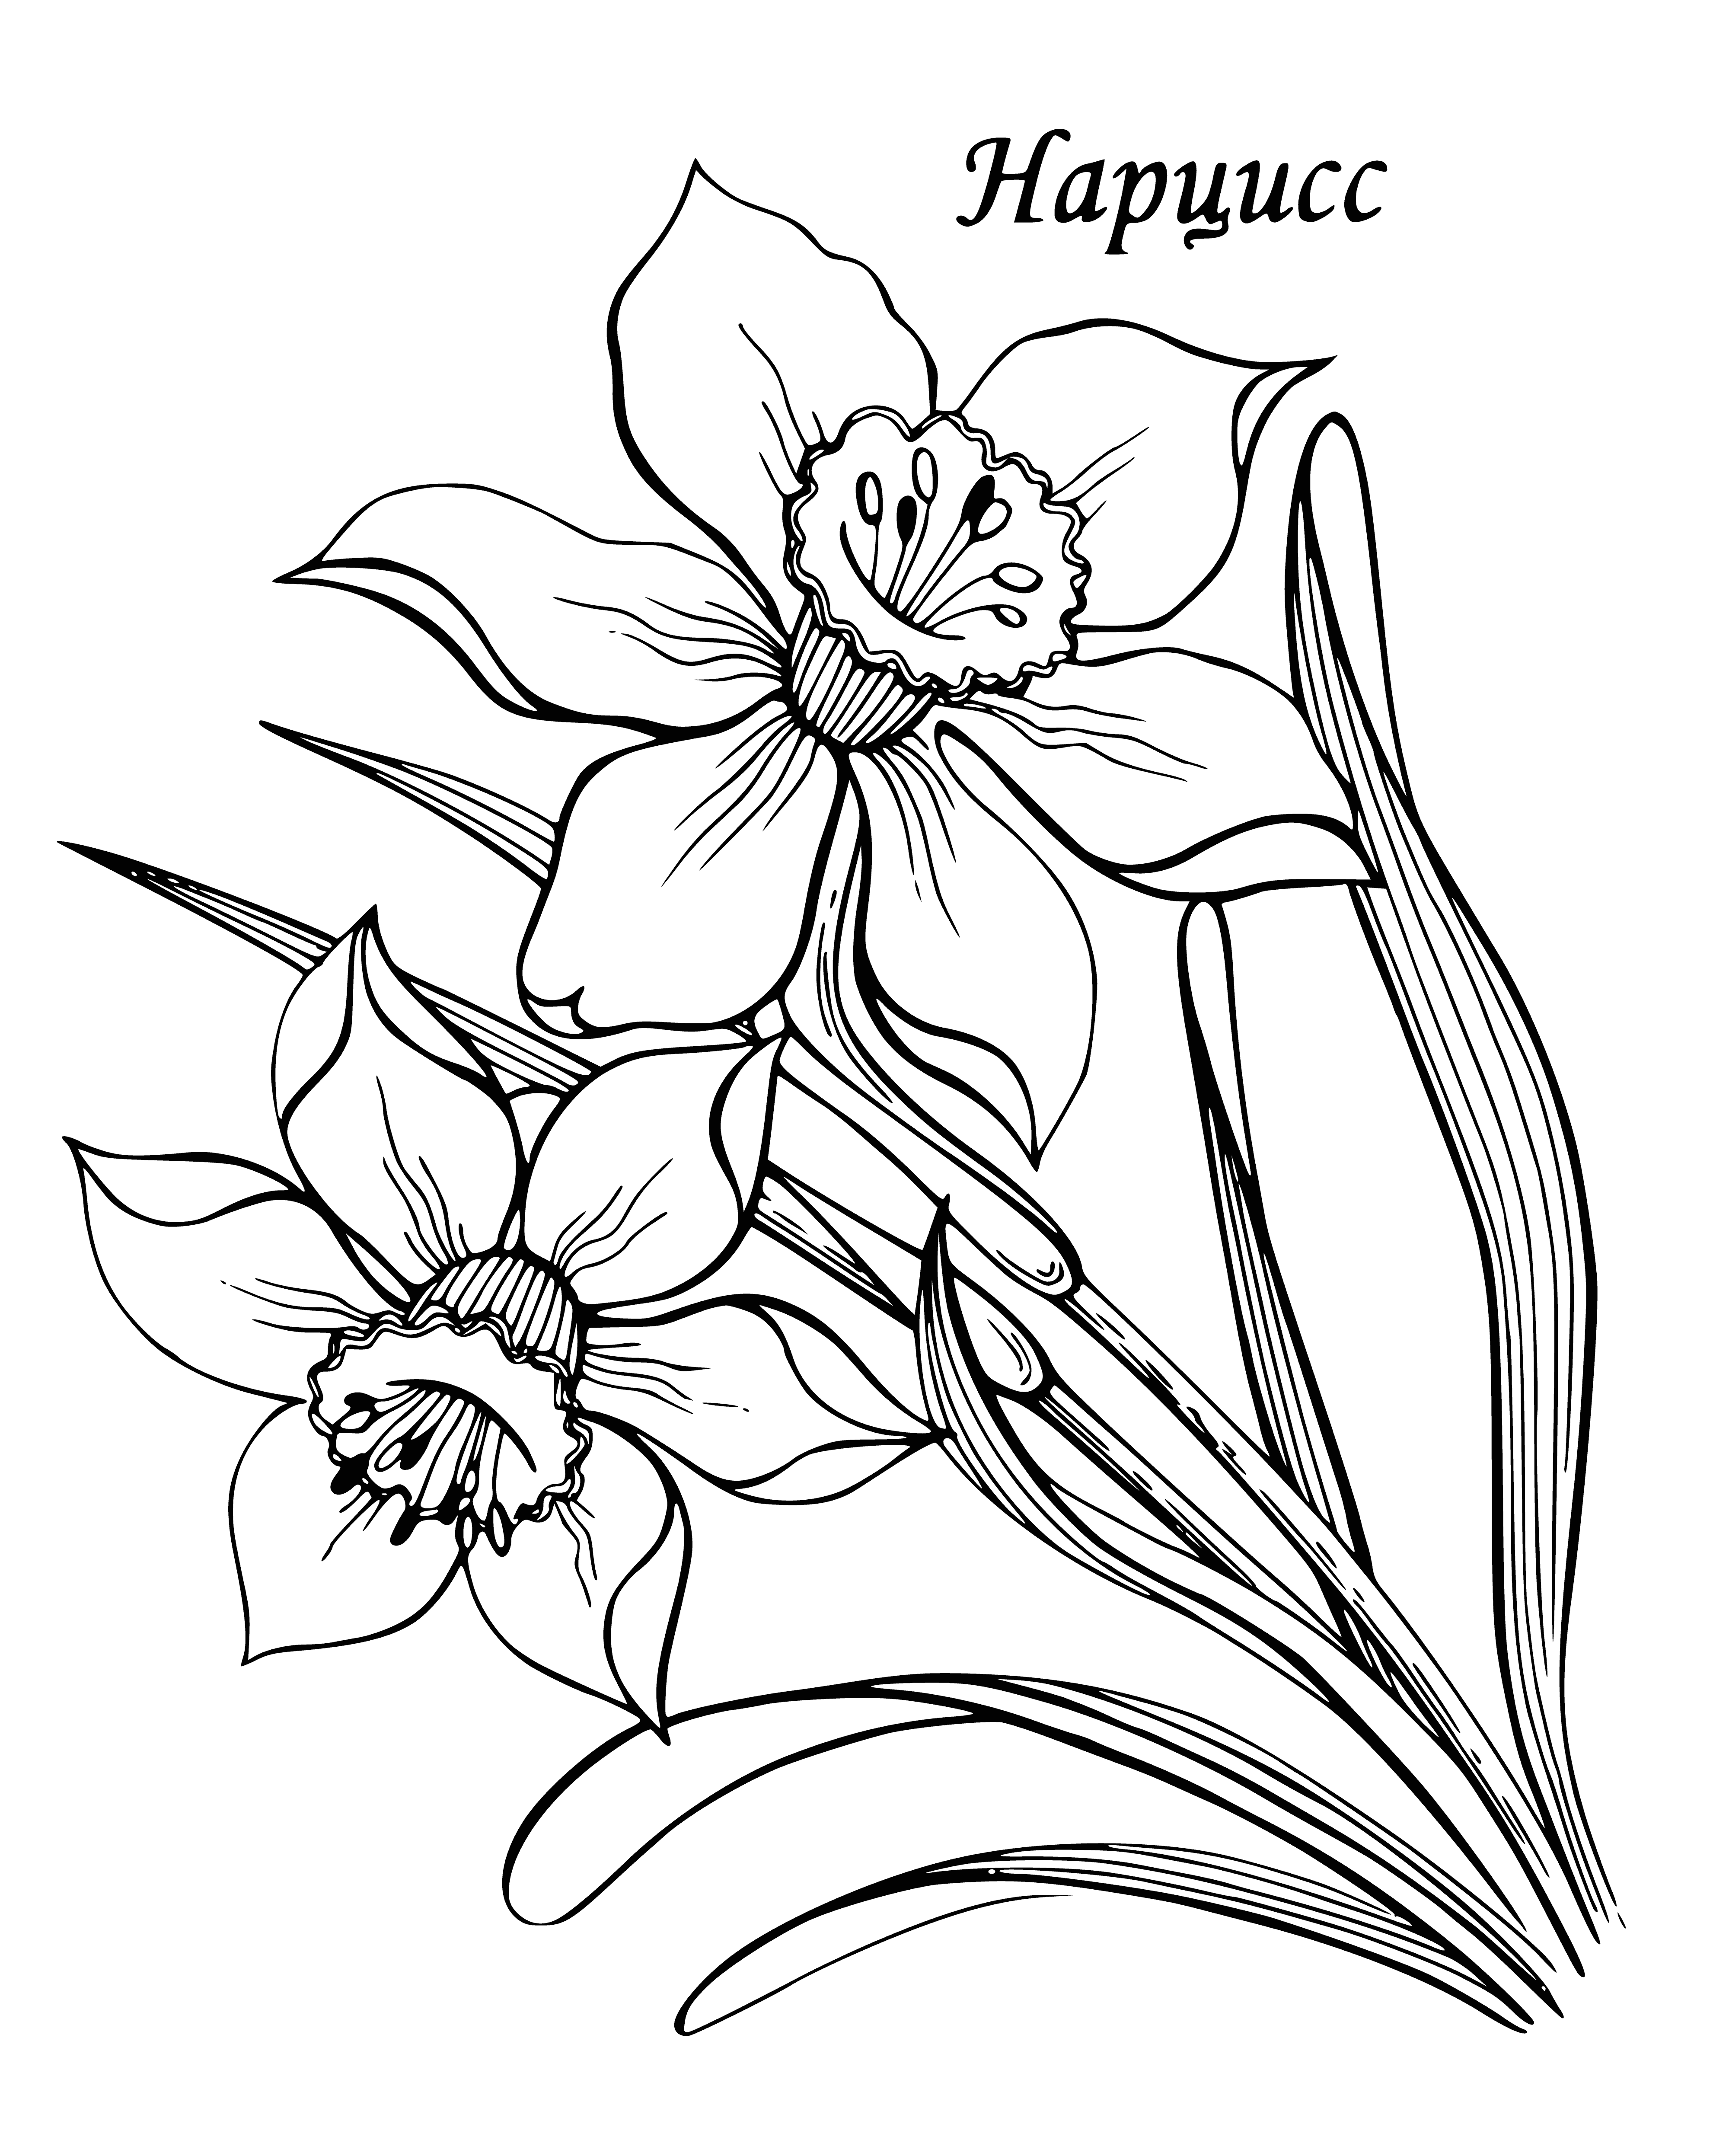 coloring page: Narcissus is a flower with white pedals, a yellow protruding center, and long, thin leaves. It grows in a field of green grass.